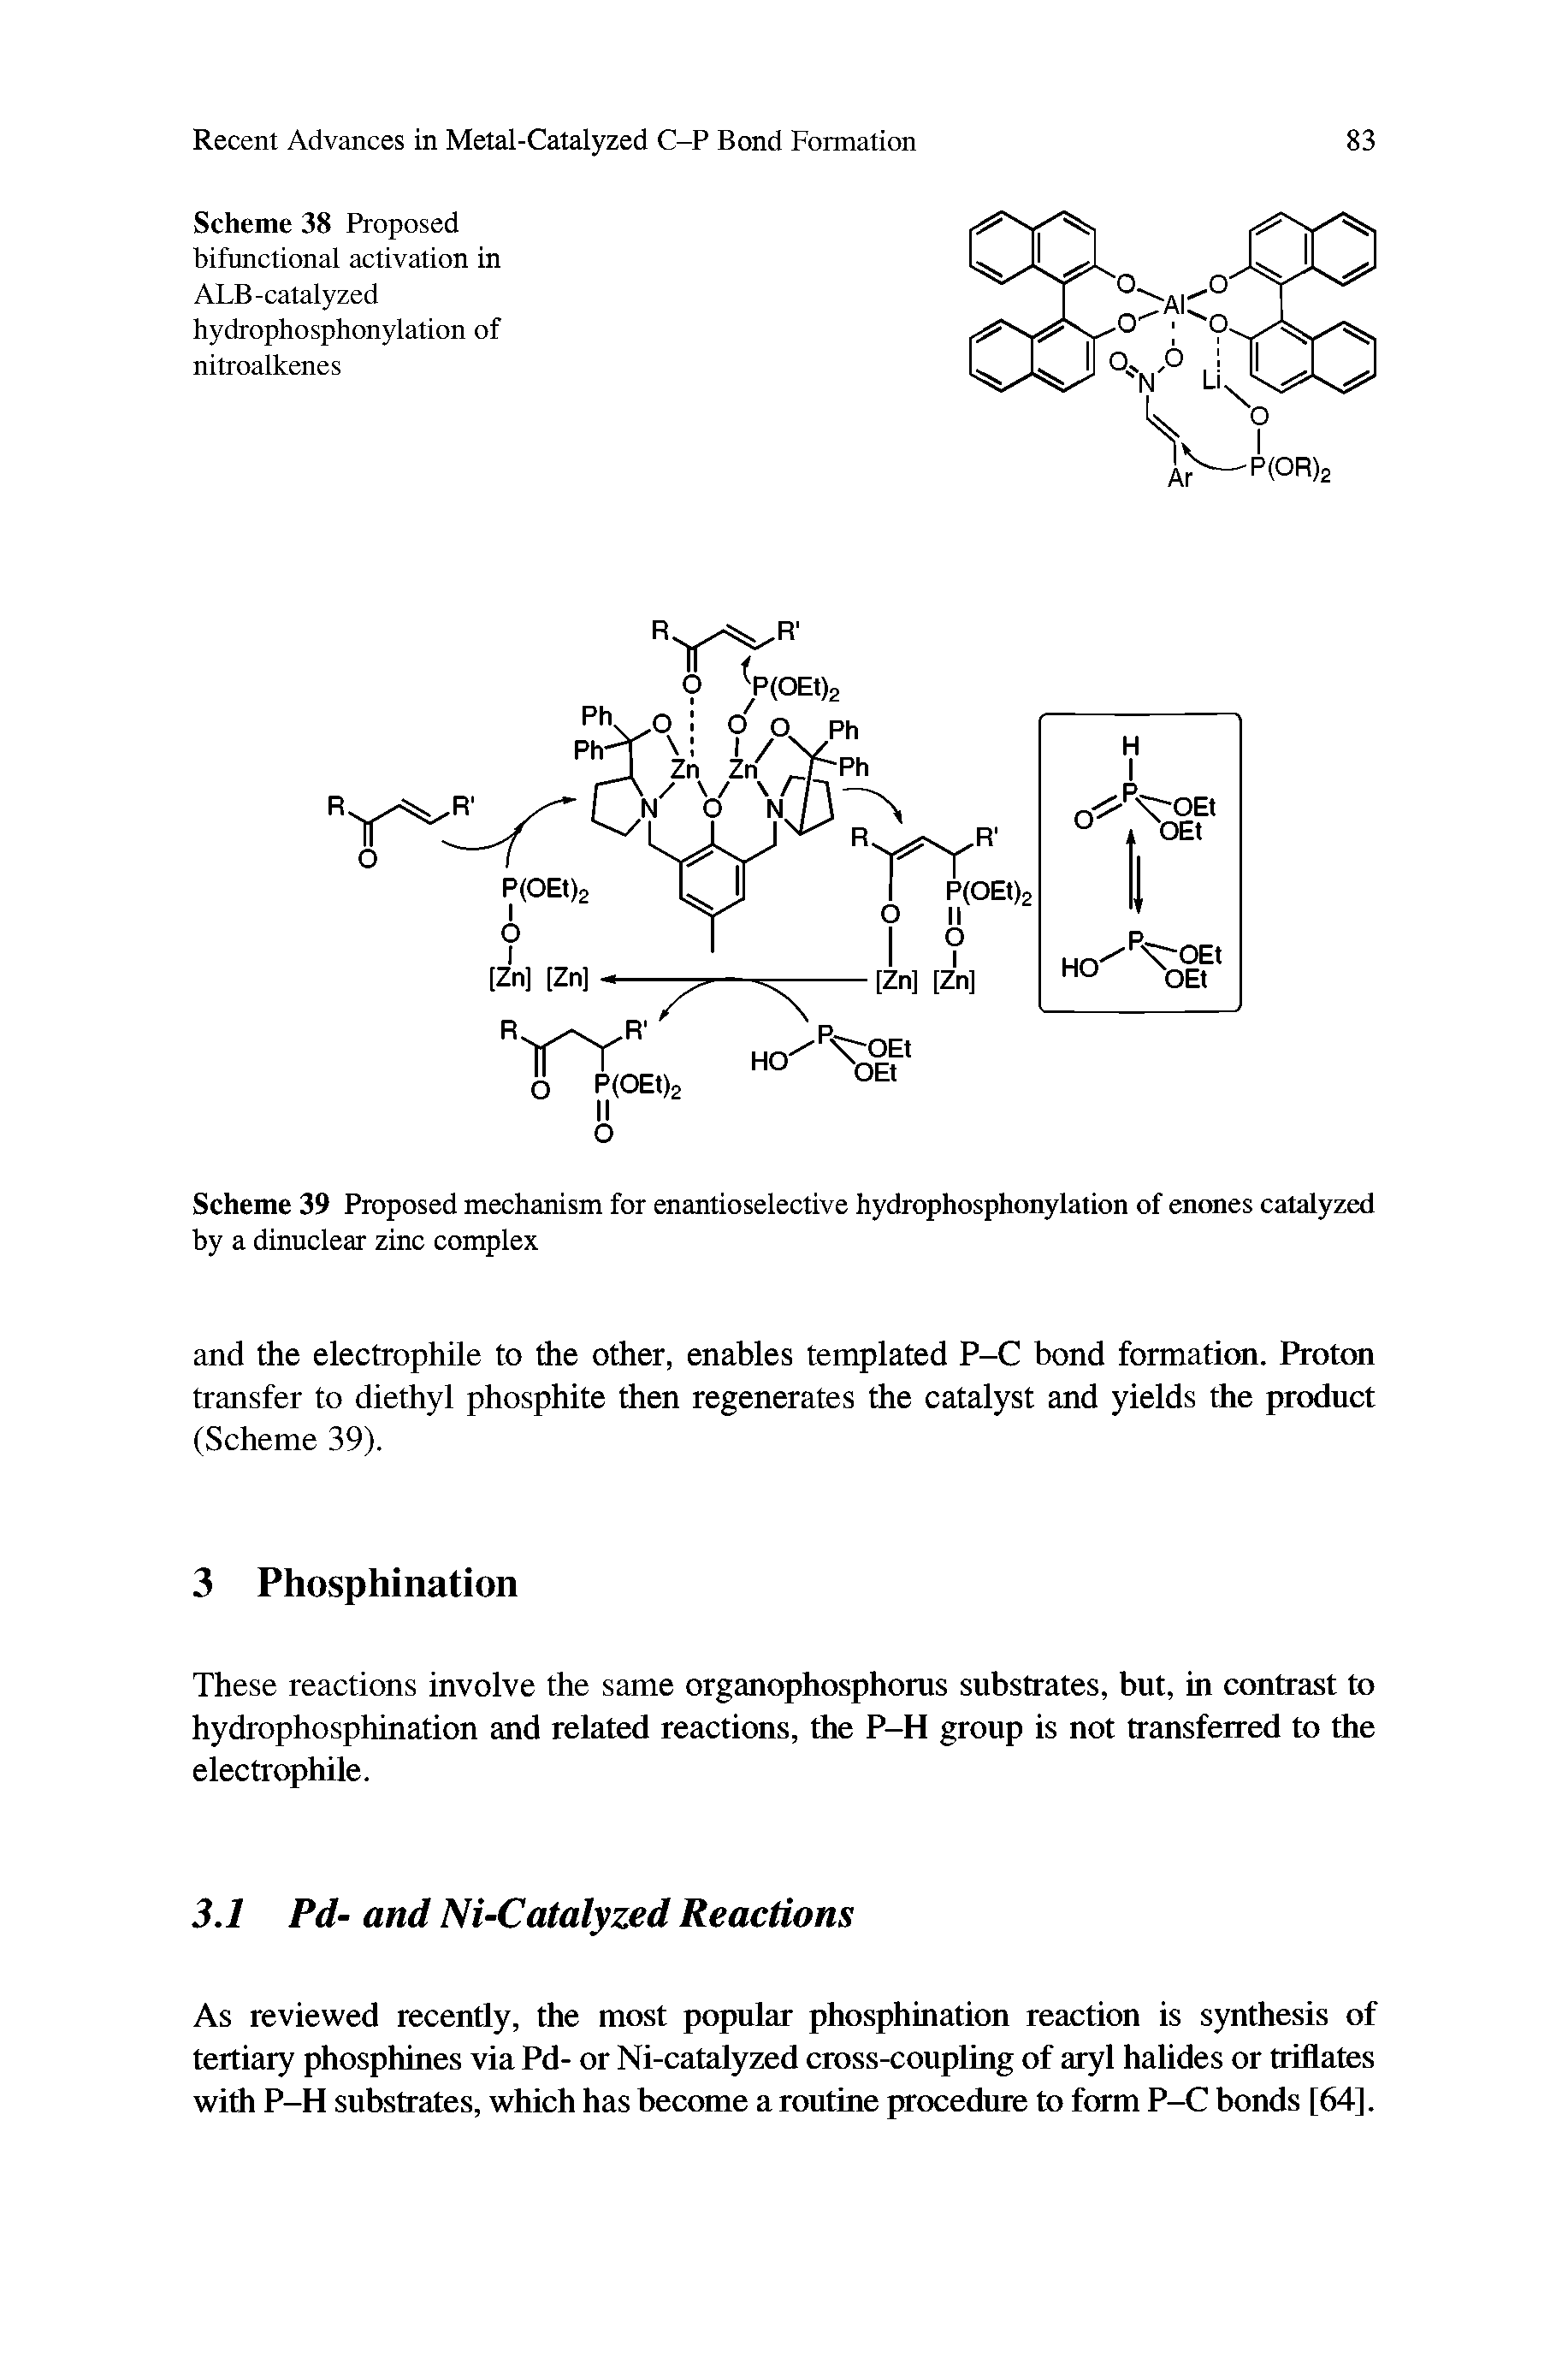 Scheme 39 Proposed mechanism for enantioselective hydrophosphonylation of enones catalyzed by a dinuclear zinc complex...